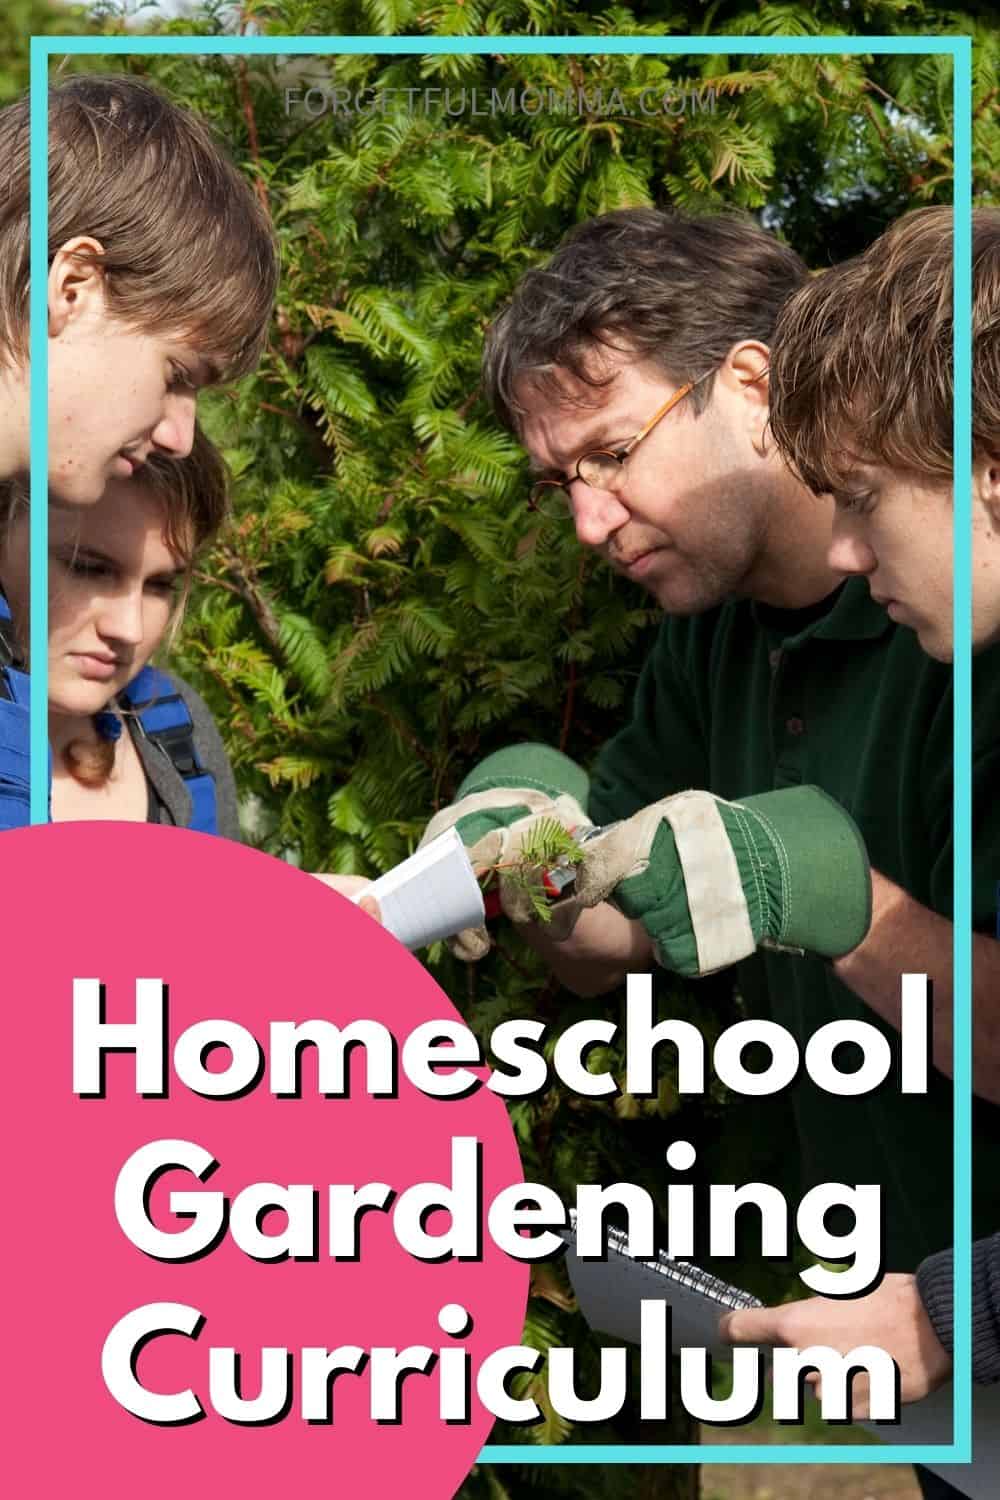 Homeschool Gardening Curriculum - 4 people looking at plants and papers